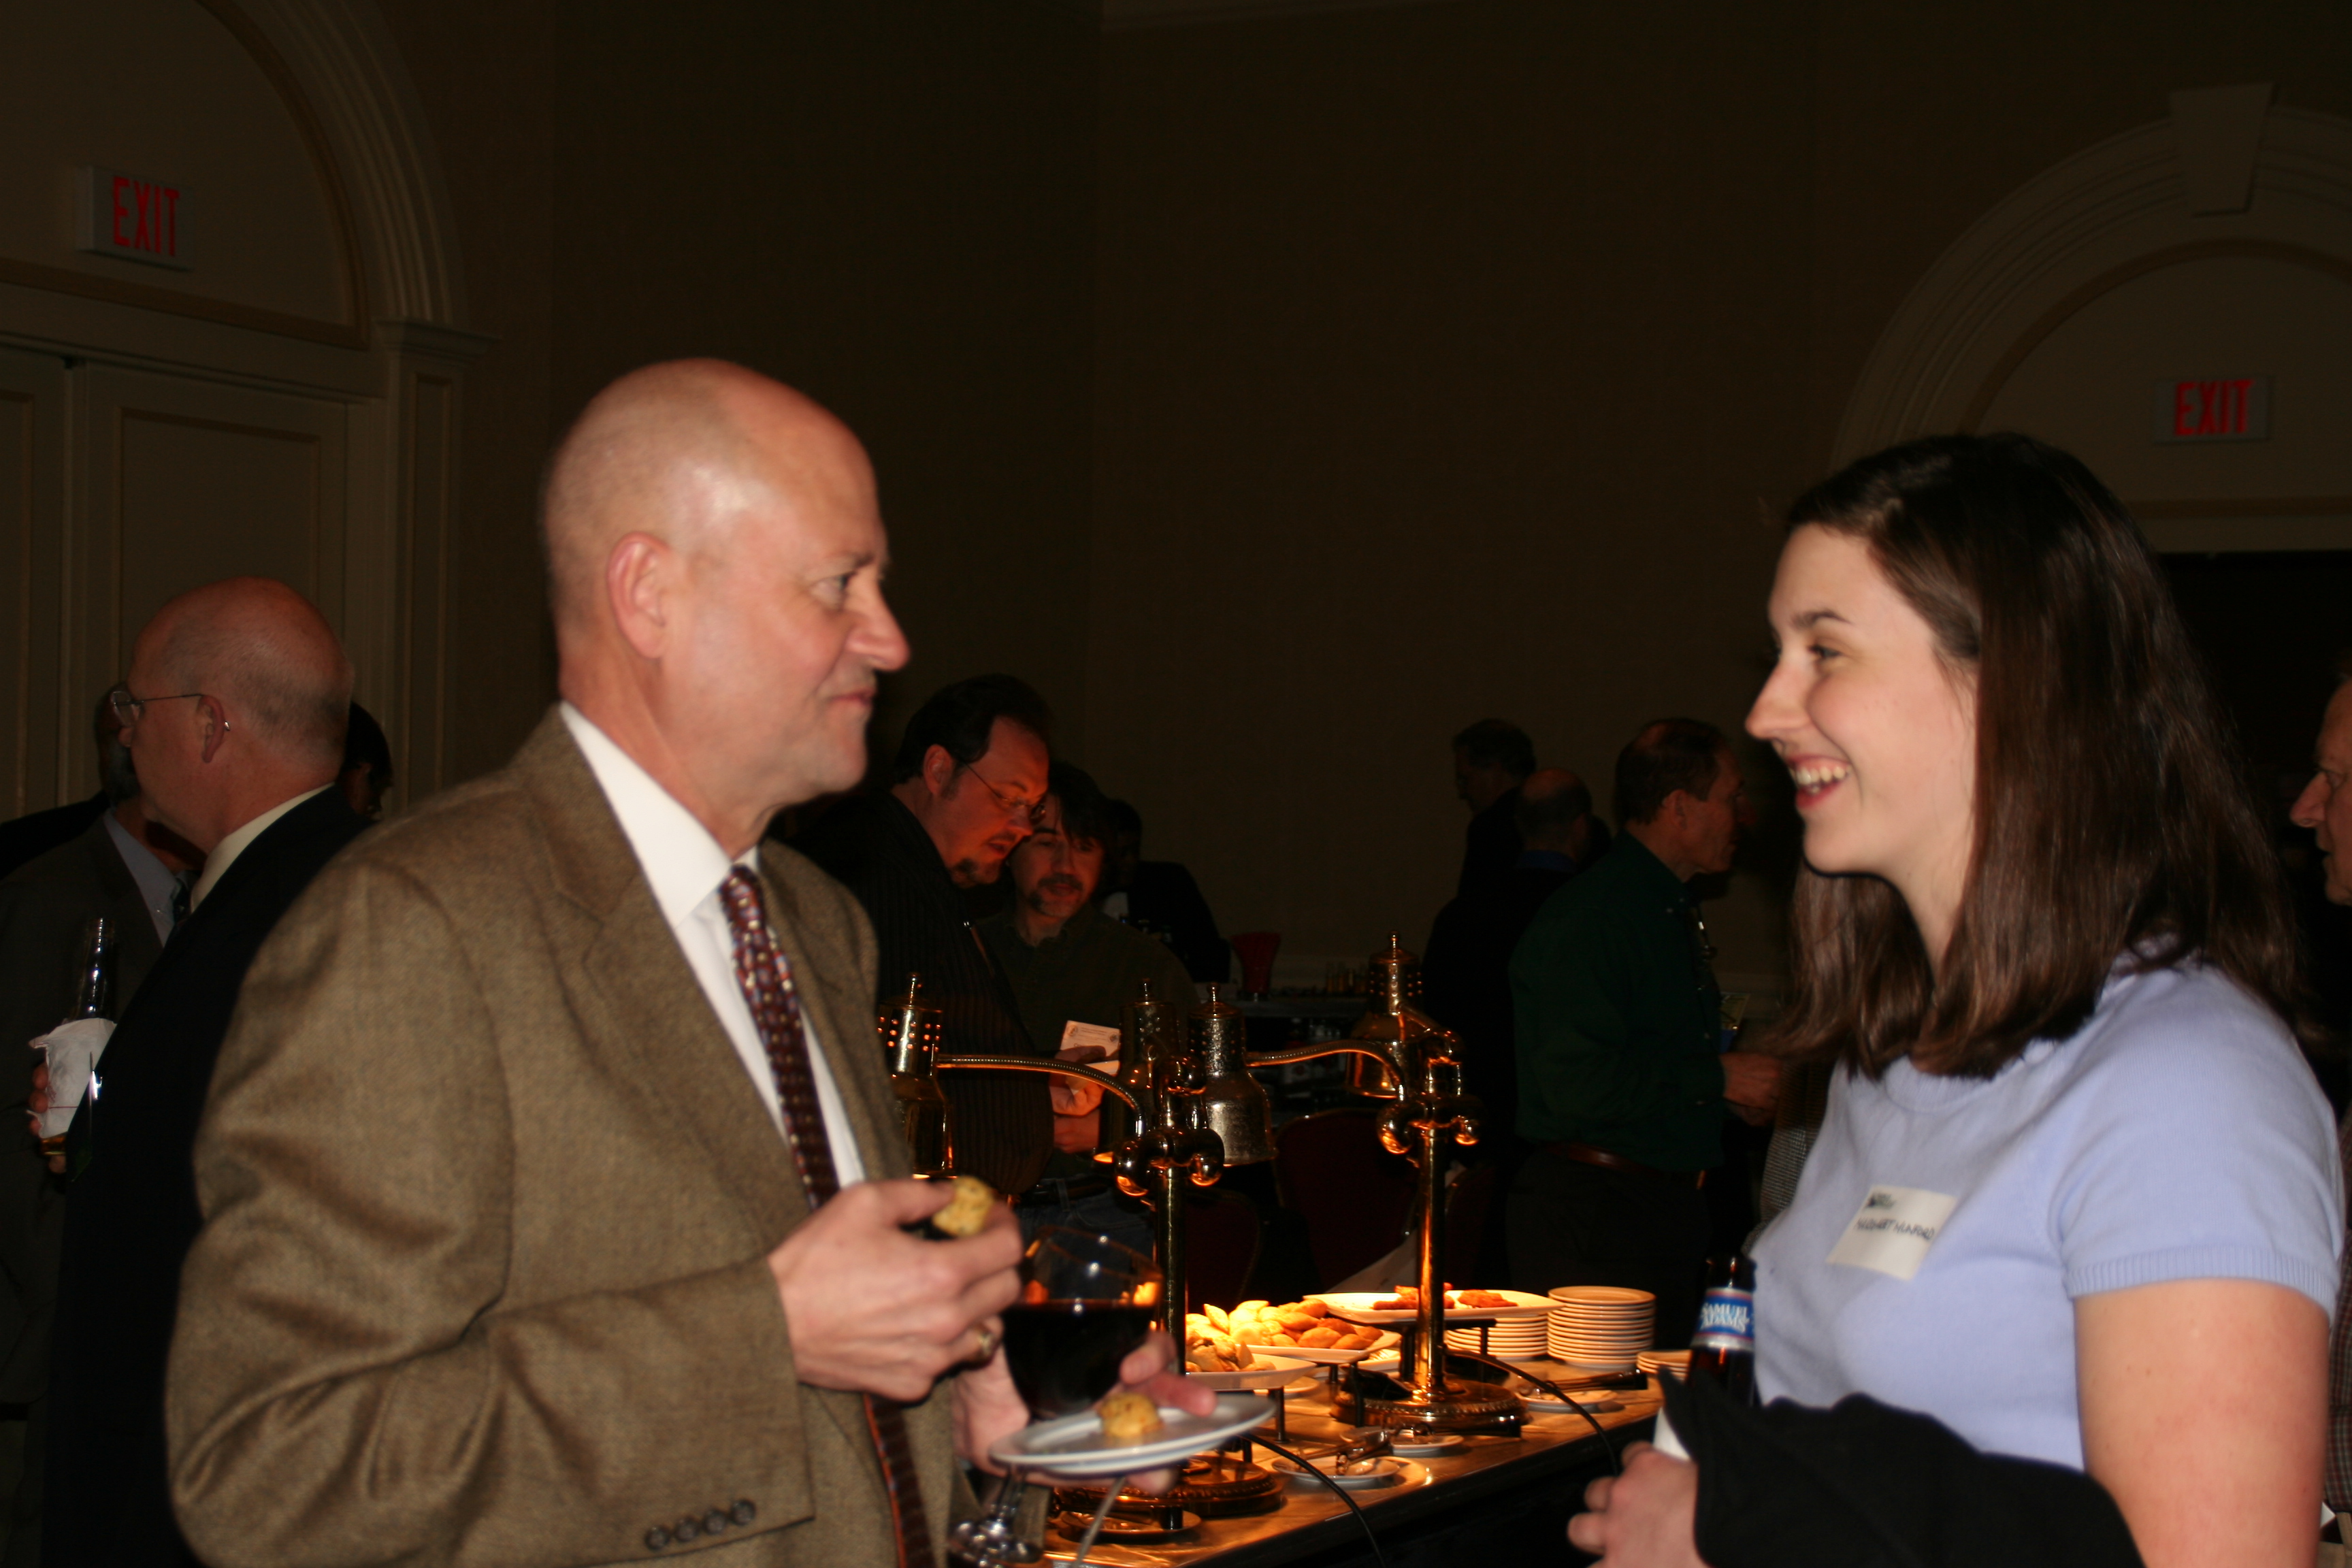 Our former Regional Forester Chuck Meyers greets Margaret Munford of the American Forest Foundation